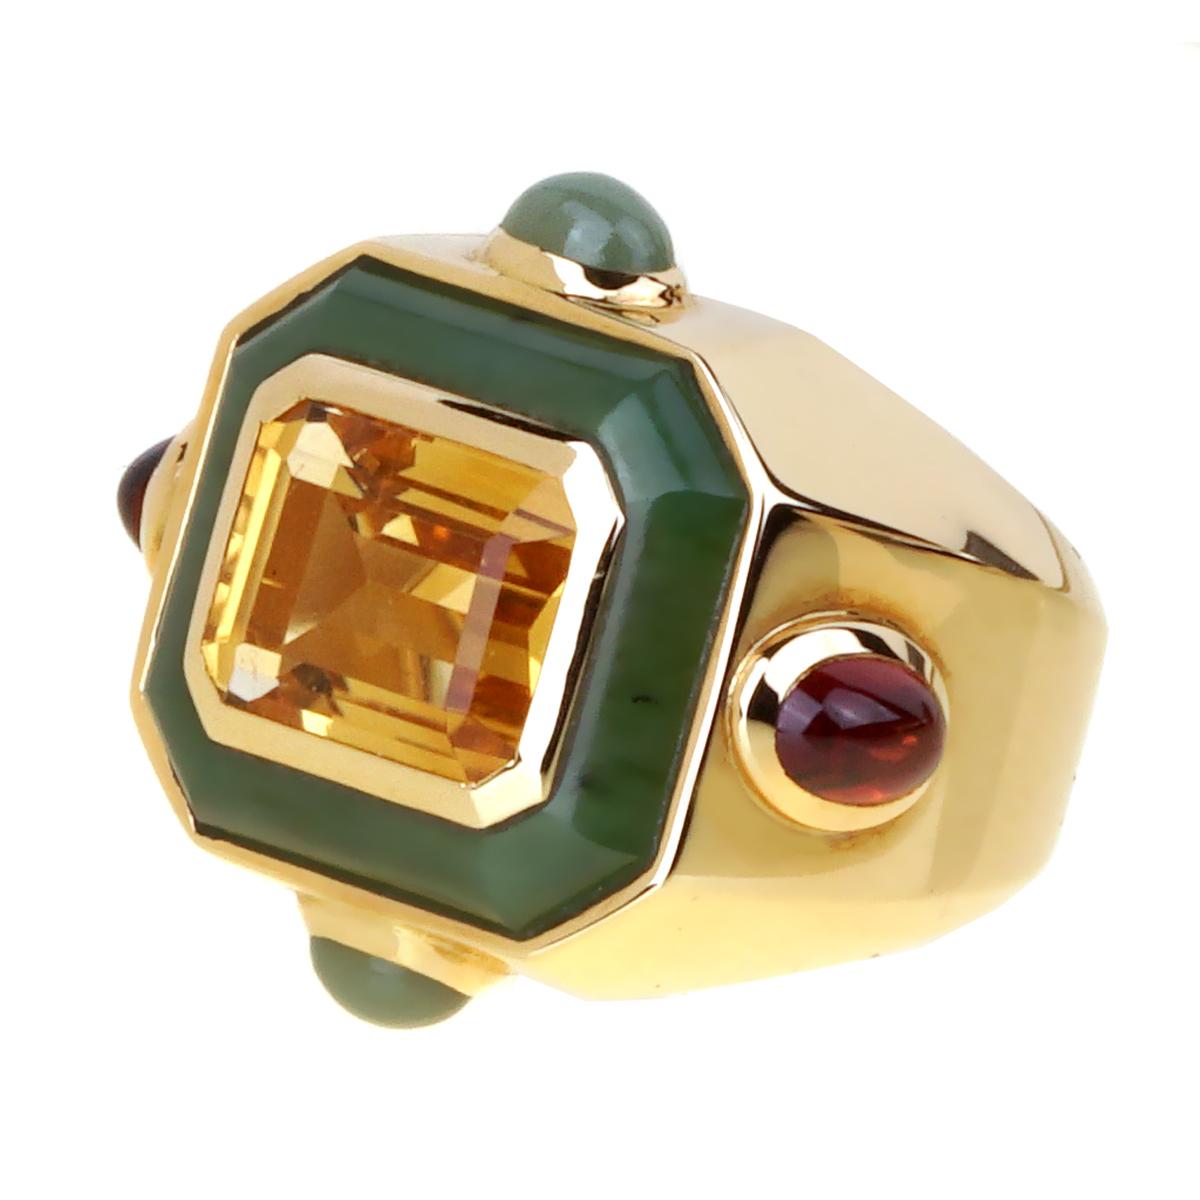 Chanel Paris Citrine Jade Gold Cocktail Ring In Excellent Condition For Sale In Feasterville, PA